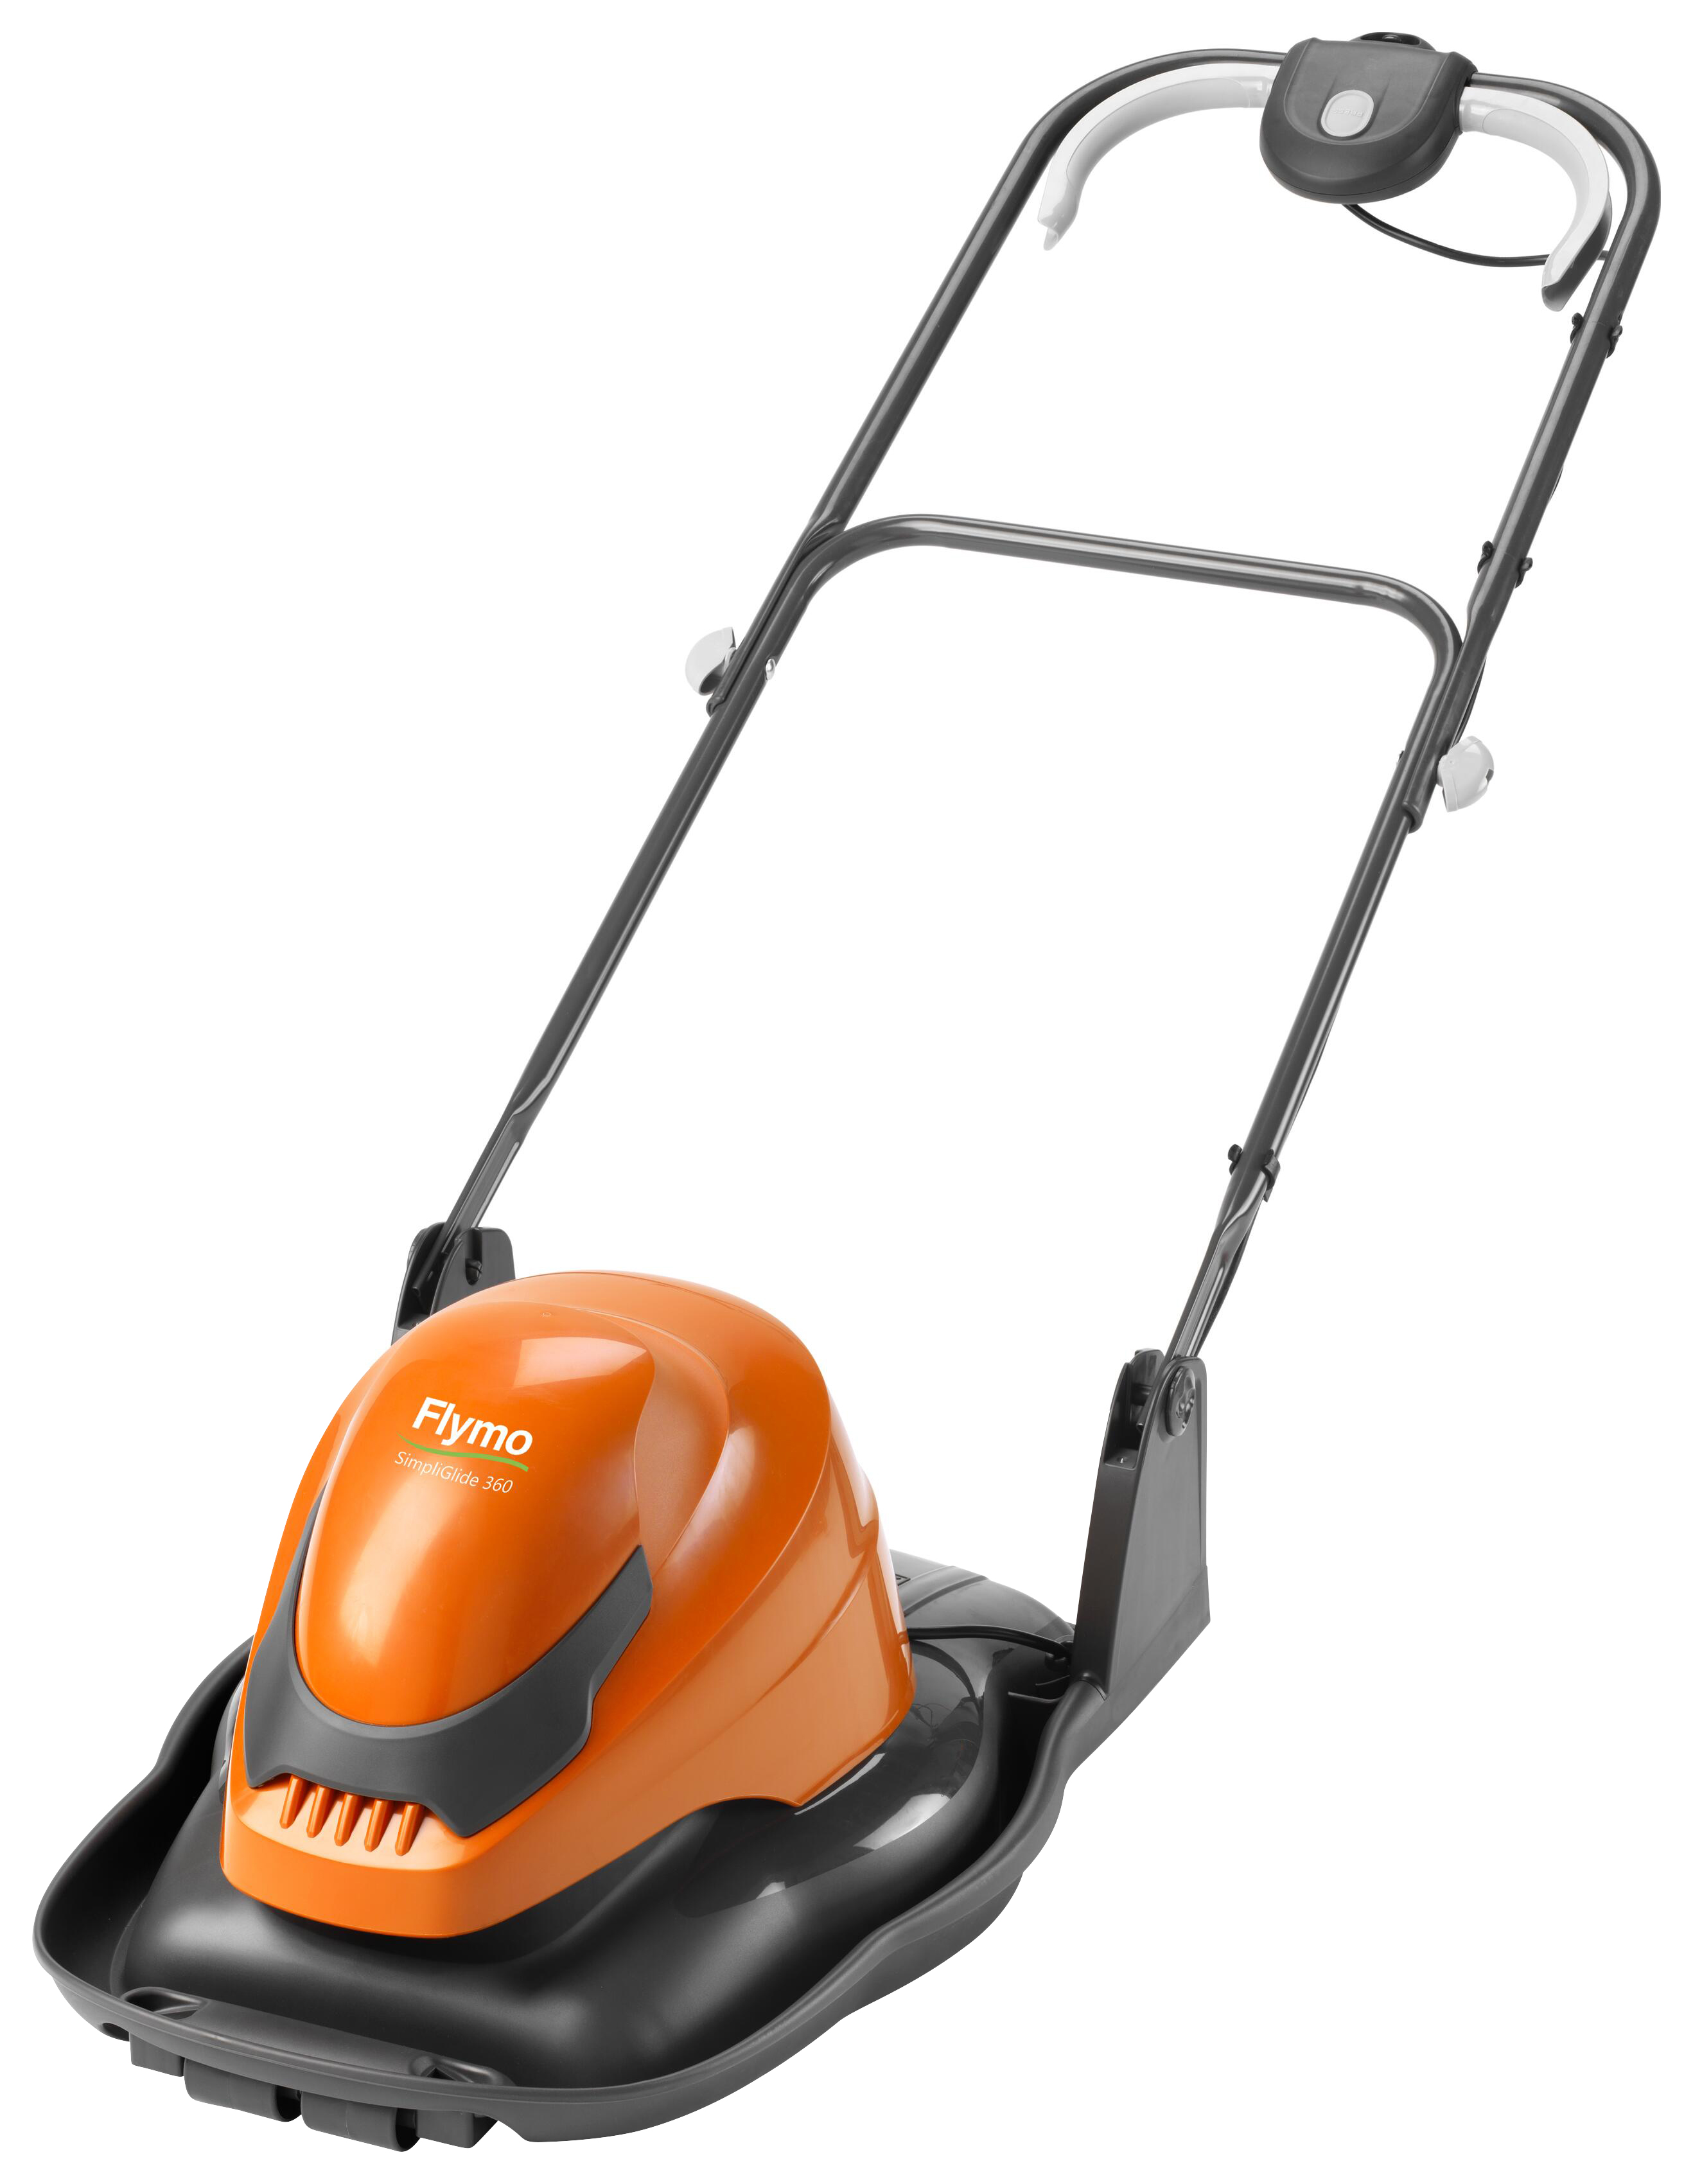 Flymo SimpliGlide 360 Corded Hover Lawnmower - 1800W